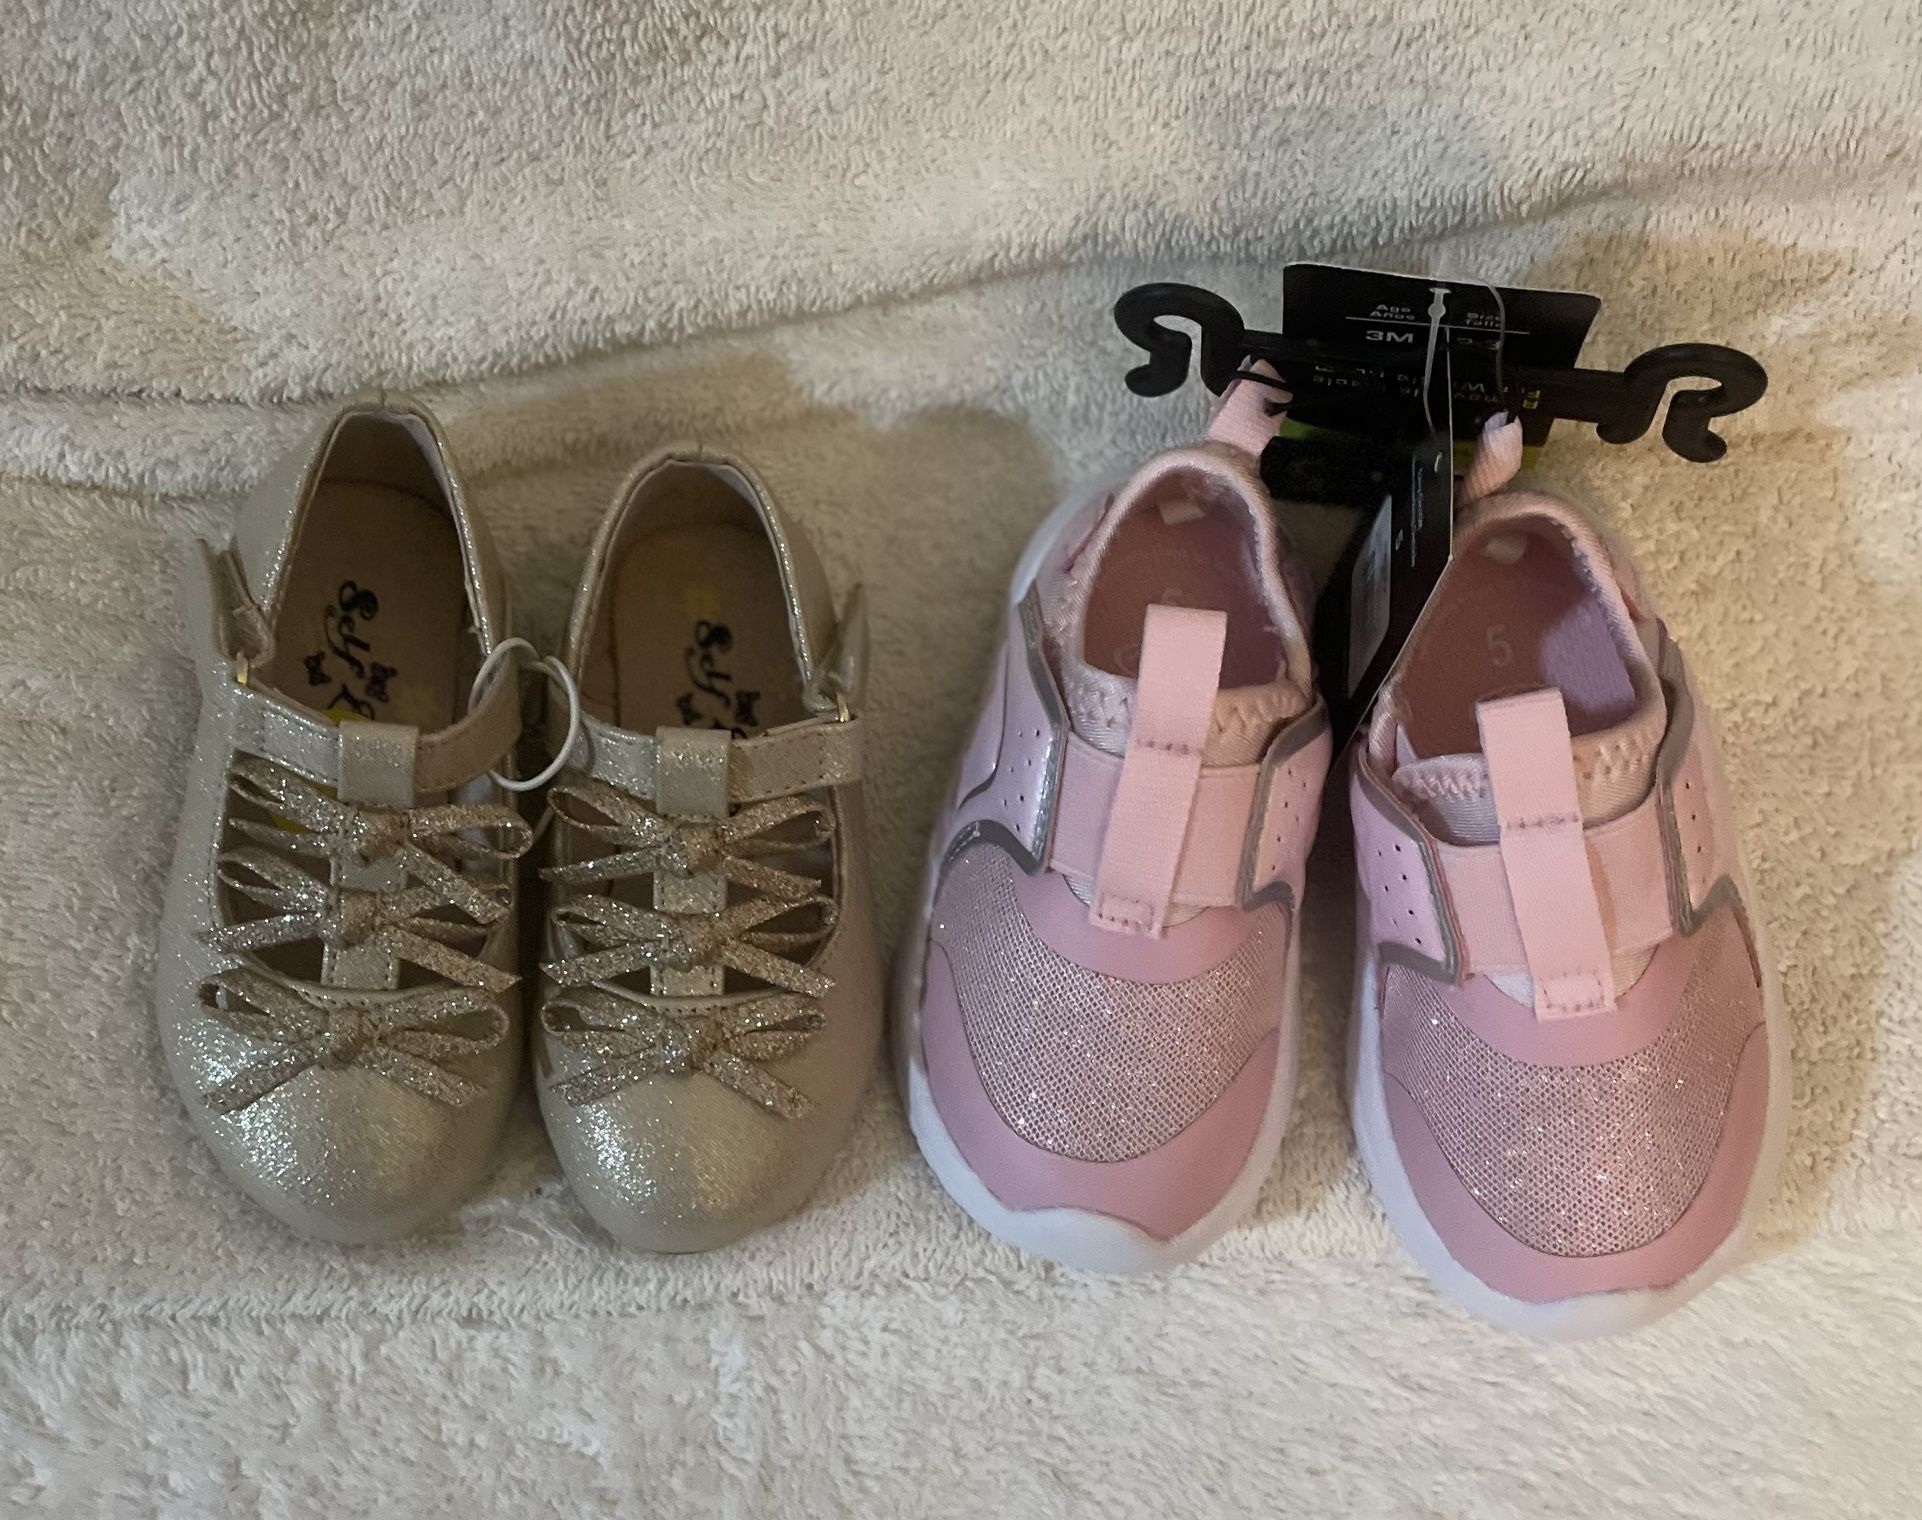 New Shoes toddler TWO Pairs Of Shoes! Super cute!